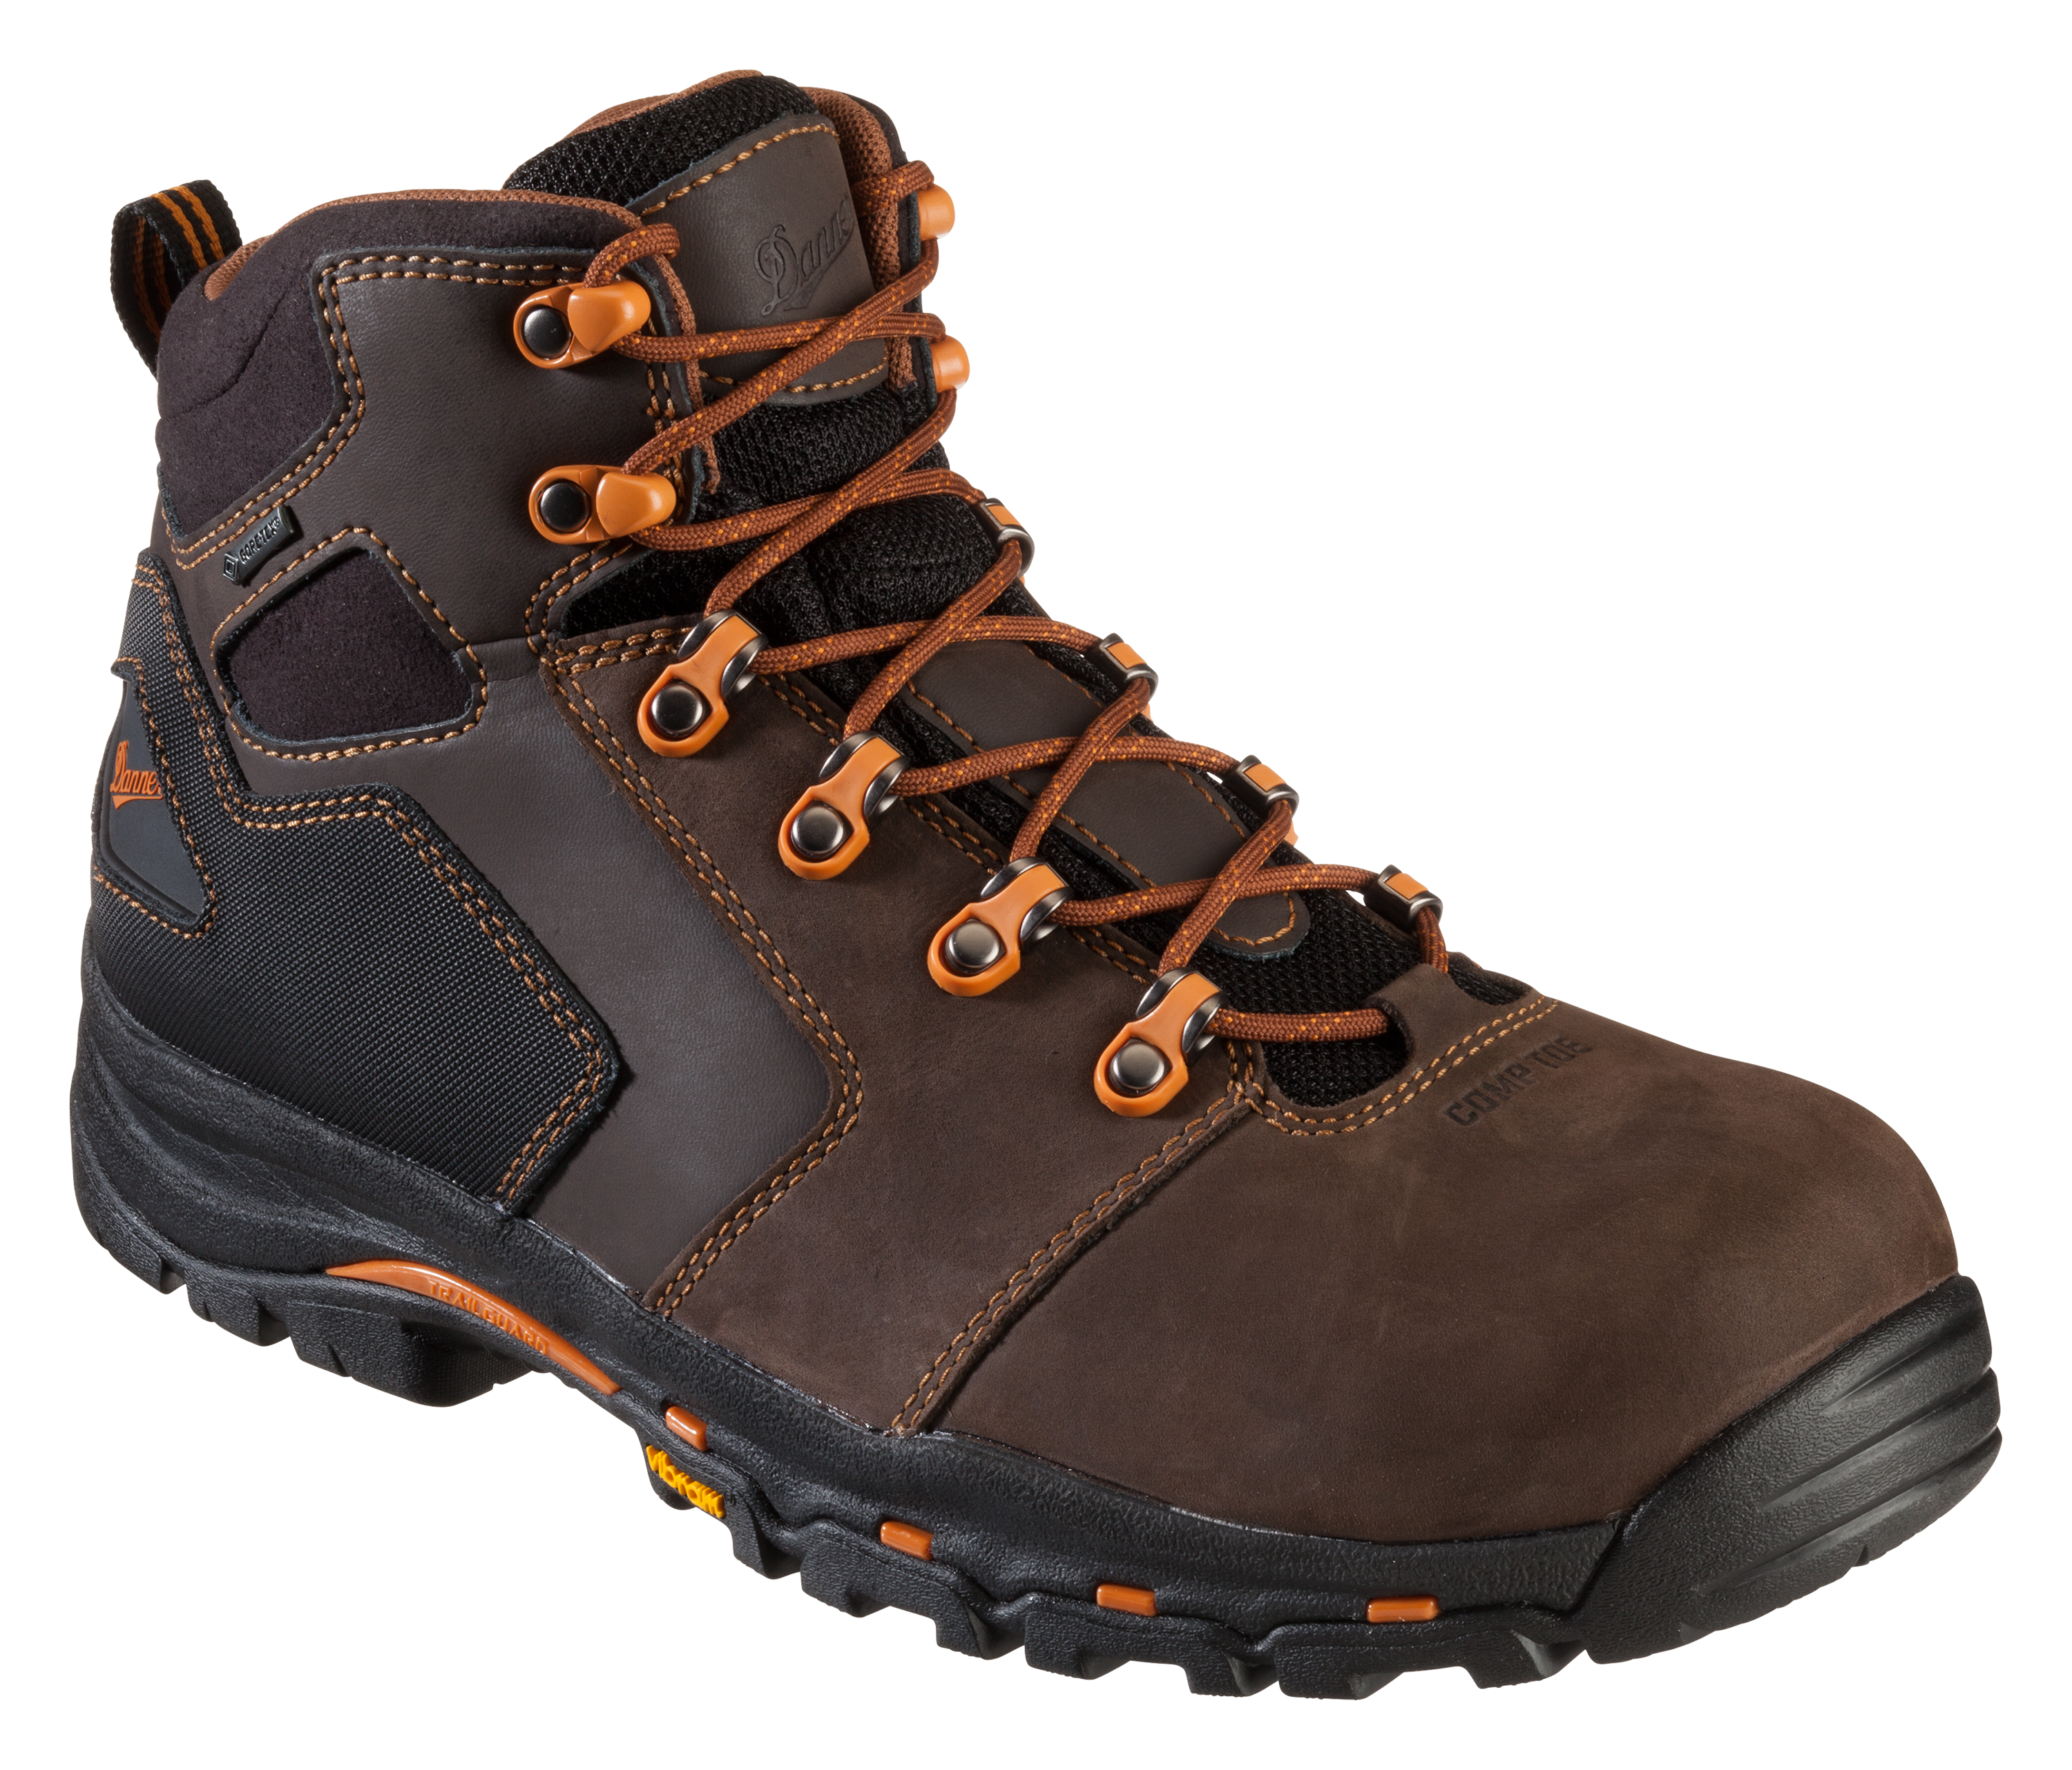 Danner Vicious GORE-TEX Non-Metallic Safety Toe Work Boots for Men - Brown - 8M